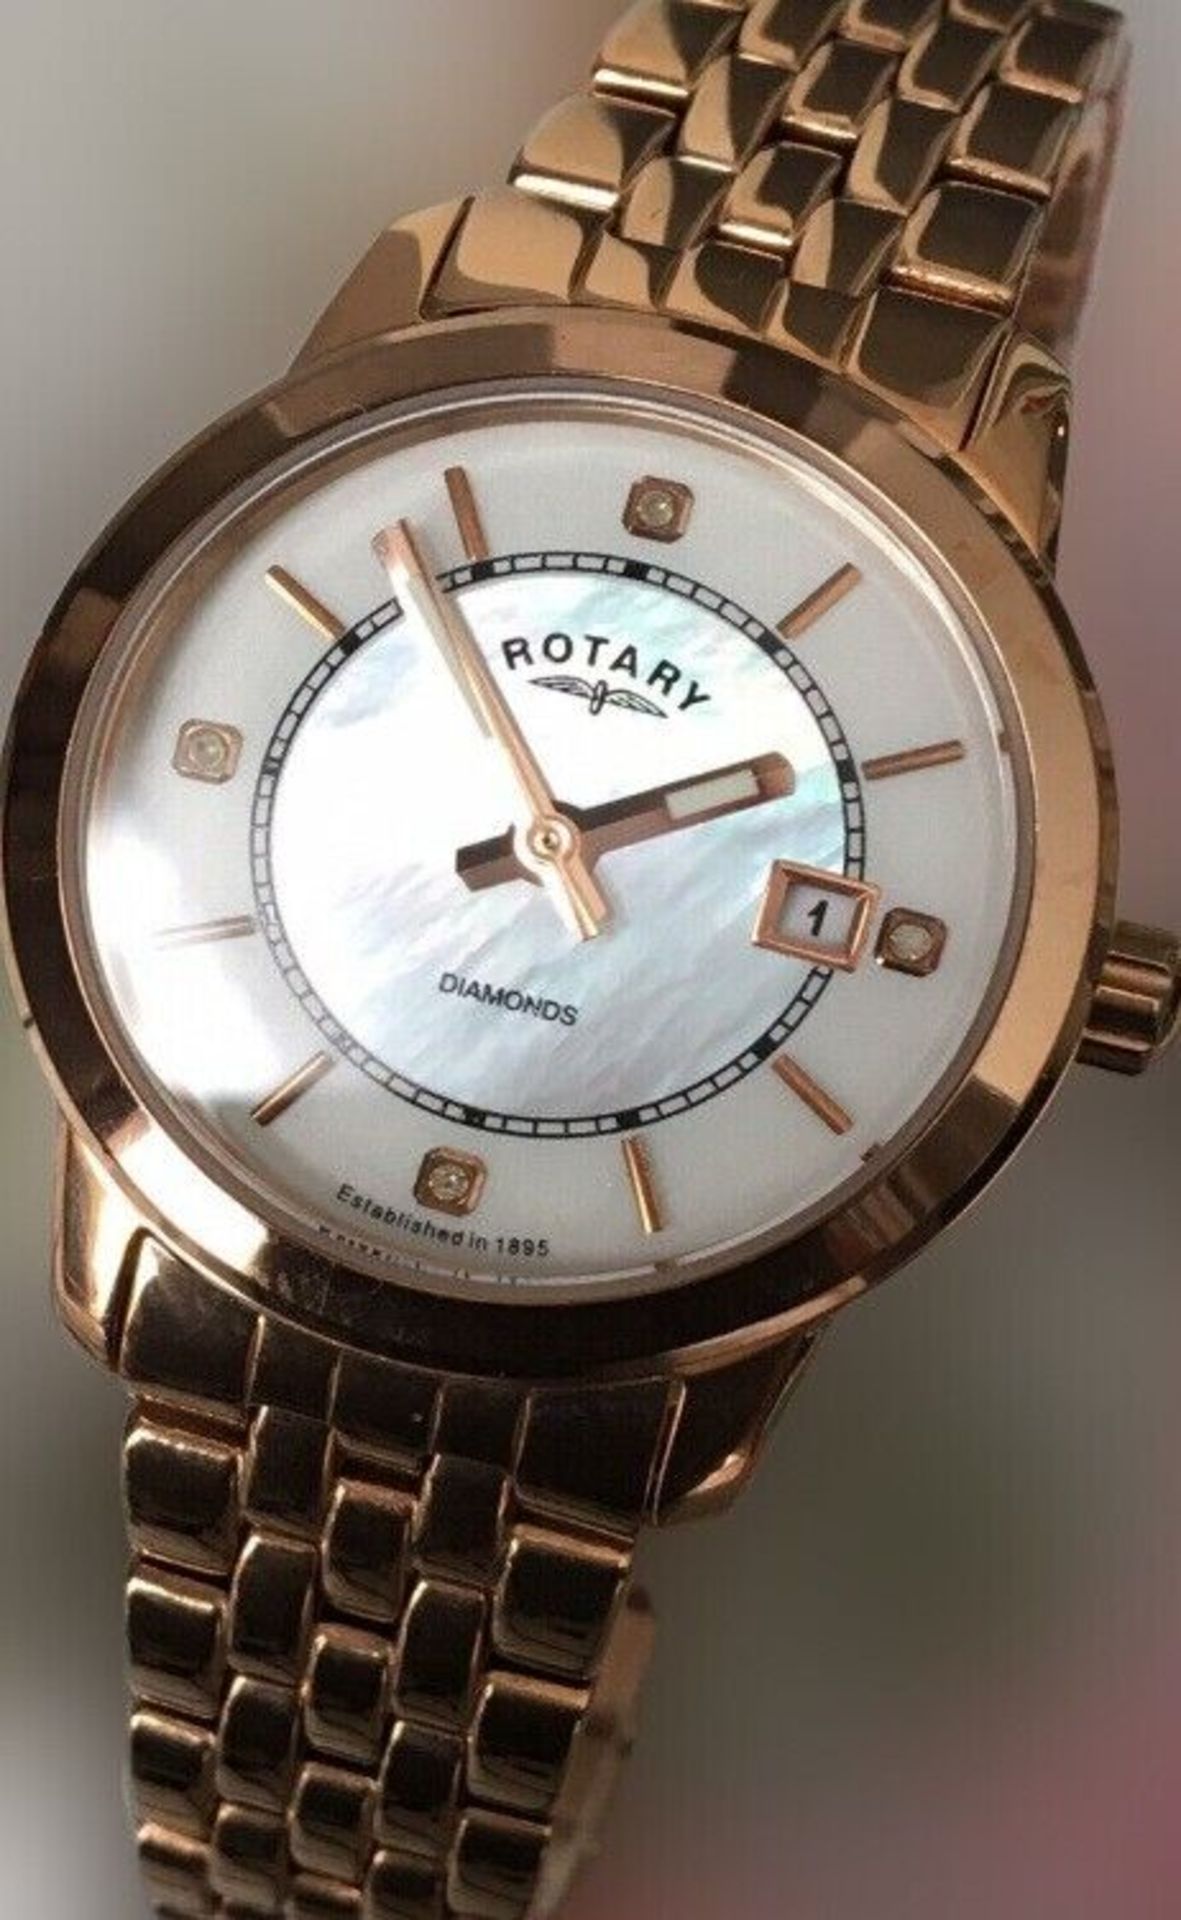 ROTARY LADIES WATCH QUARTZ ROSE GOLD PVD STEEL LB00246/41 DIAMONDS PEARL DIAL - Image 3 of 8